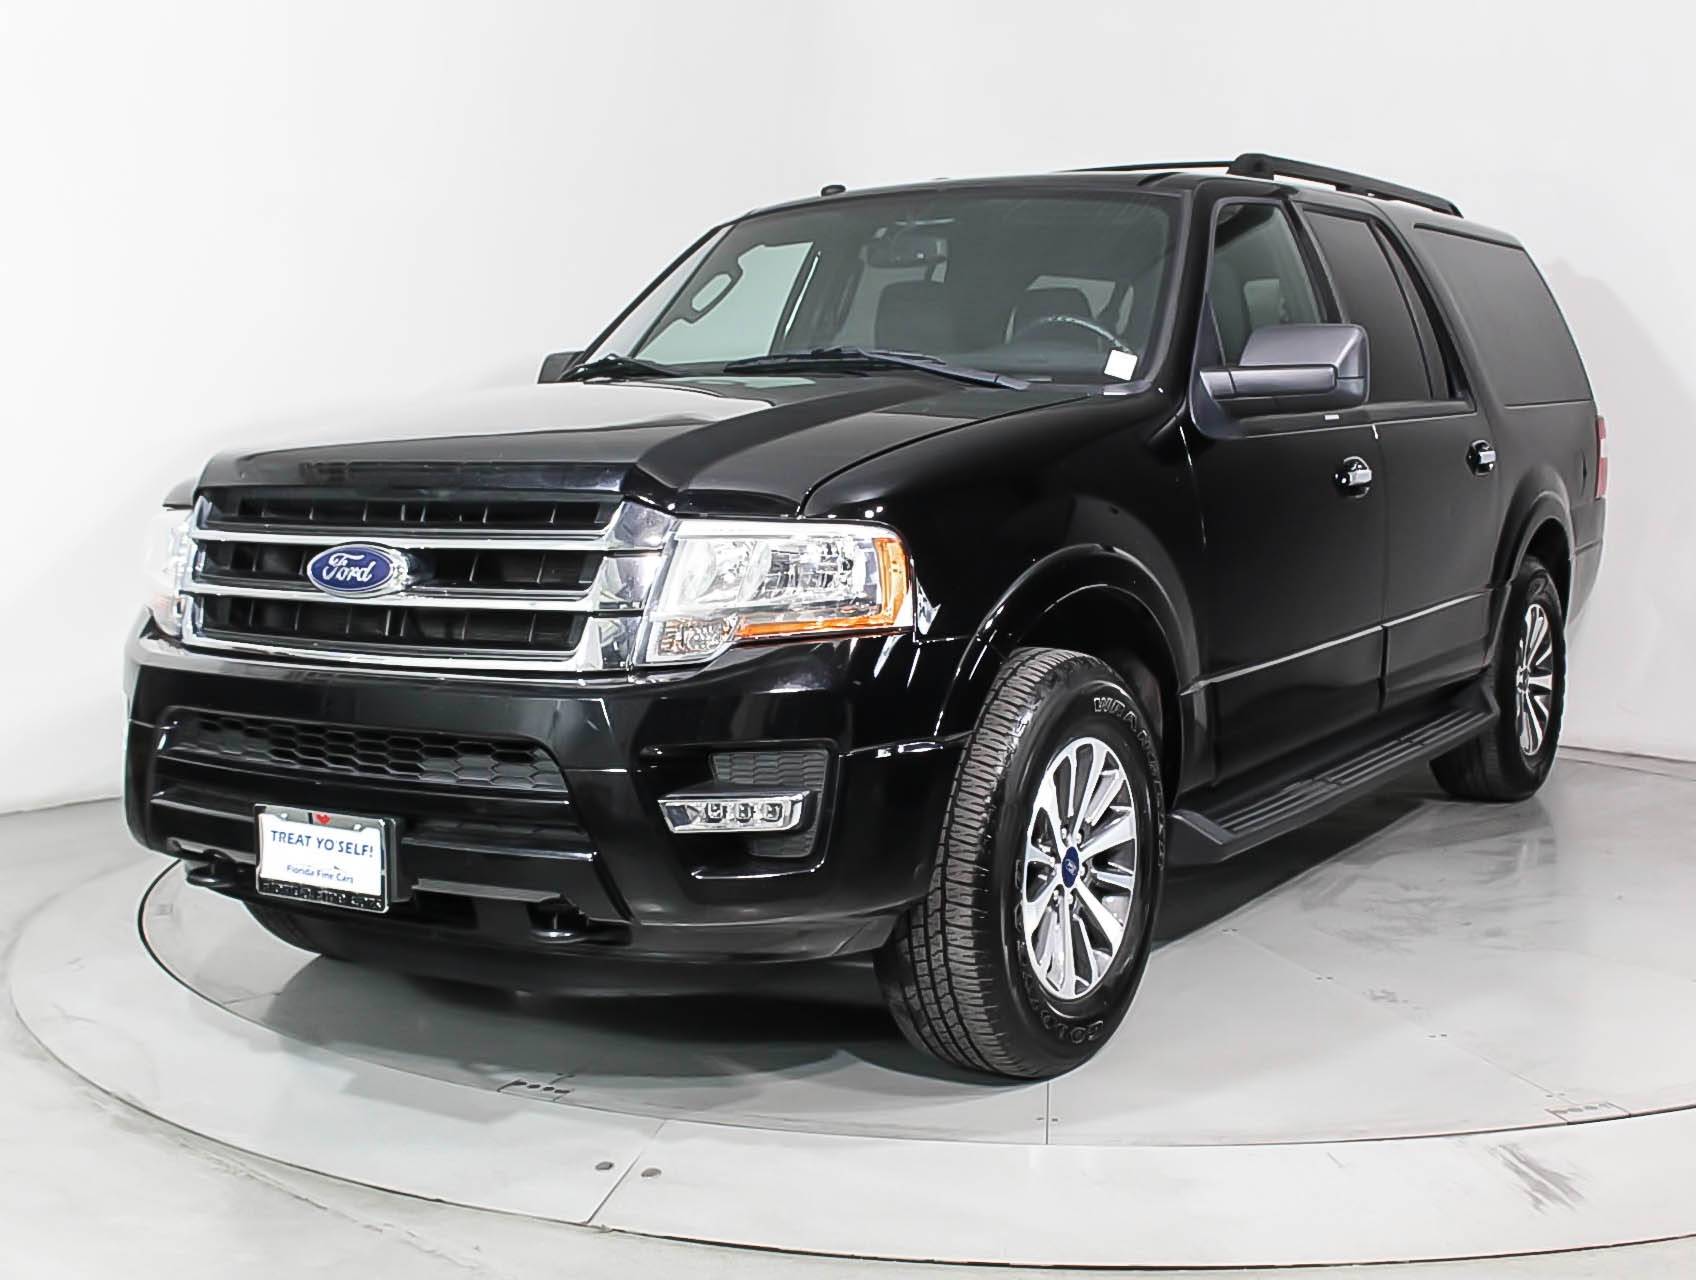 Florida Fine Cars - Used FORD EXPEDITION EL 2017 HOLLYWOOD Xlt 4x4